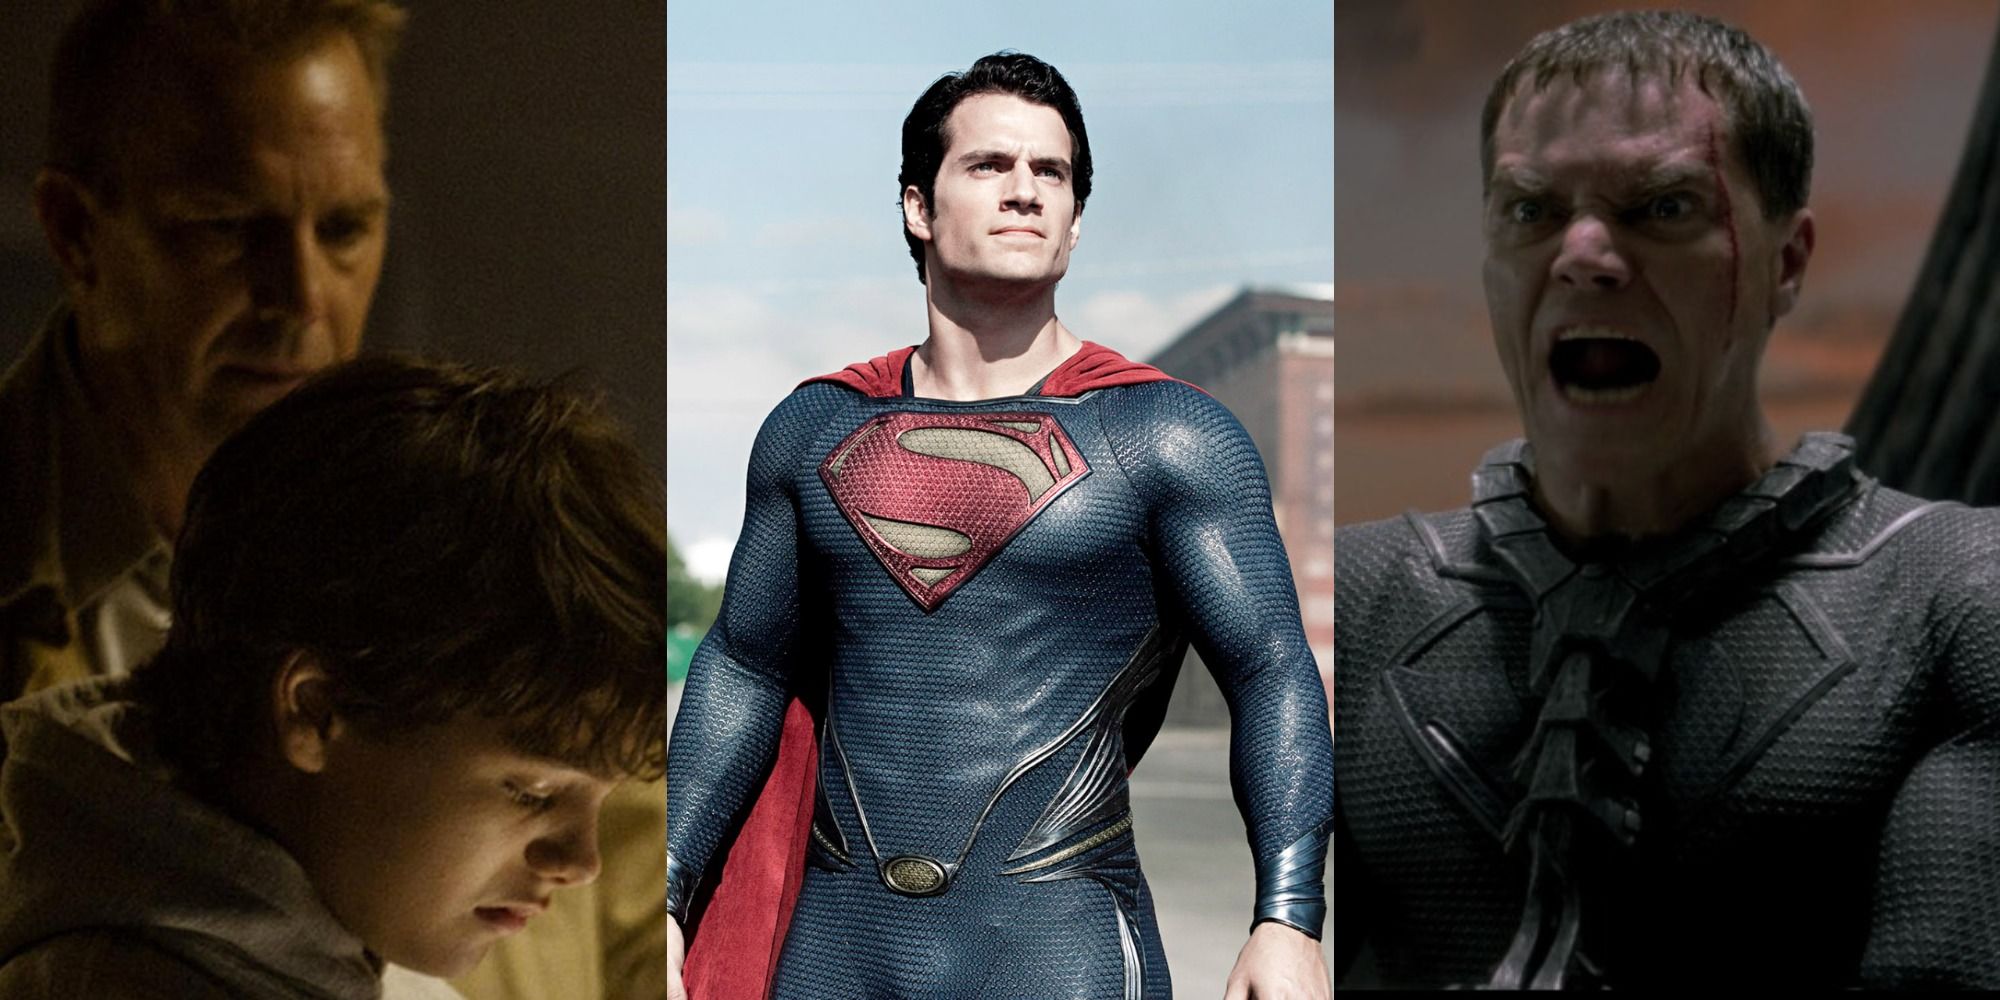 Edelstein on Man of Steel: A Movie So Heavy, Superman Would Have